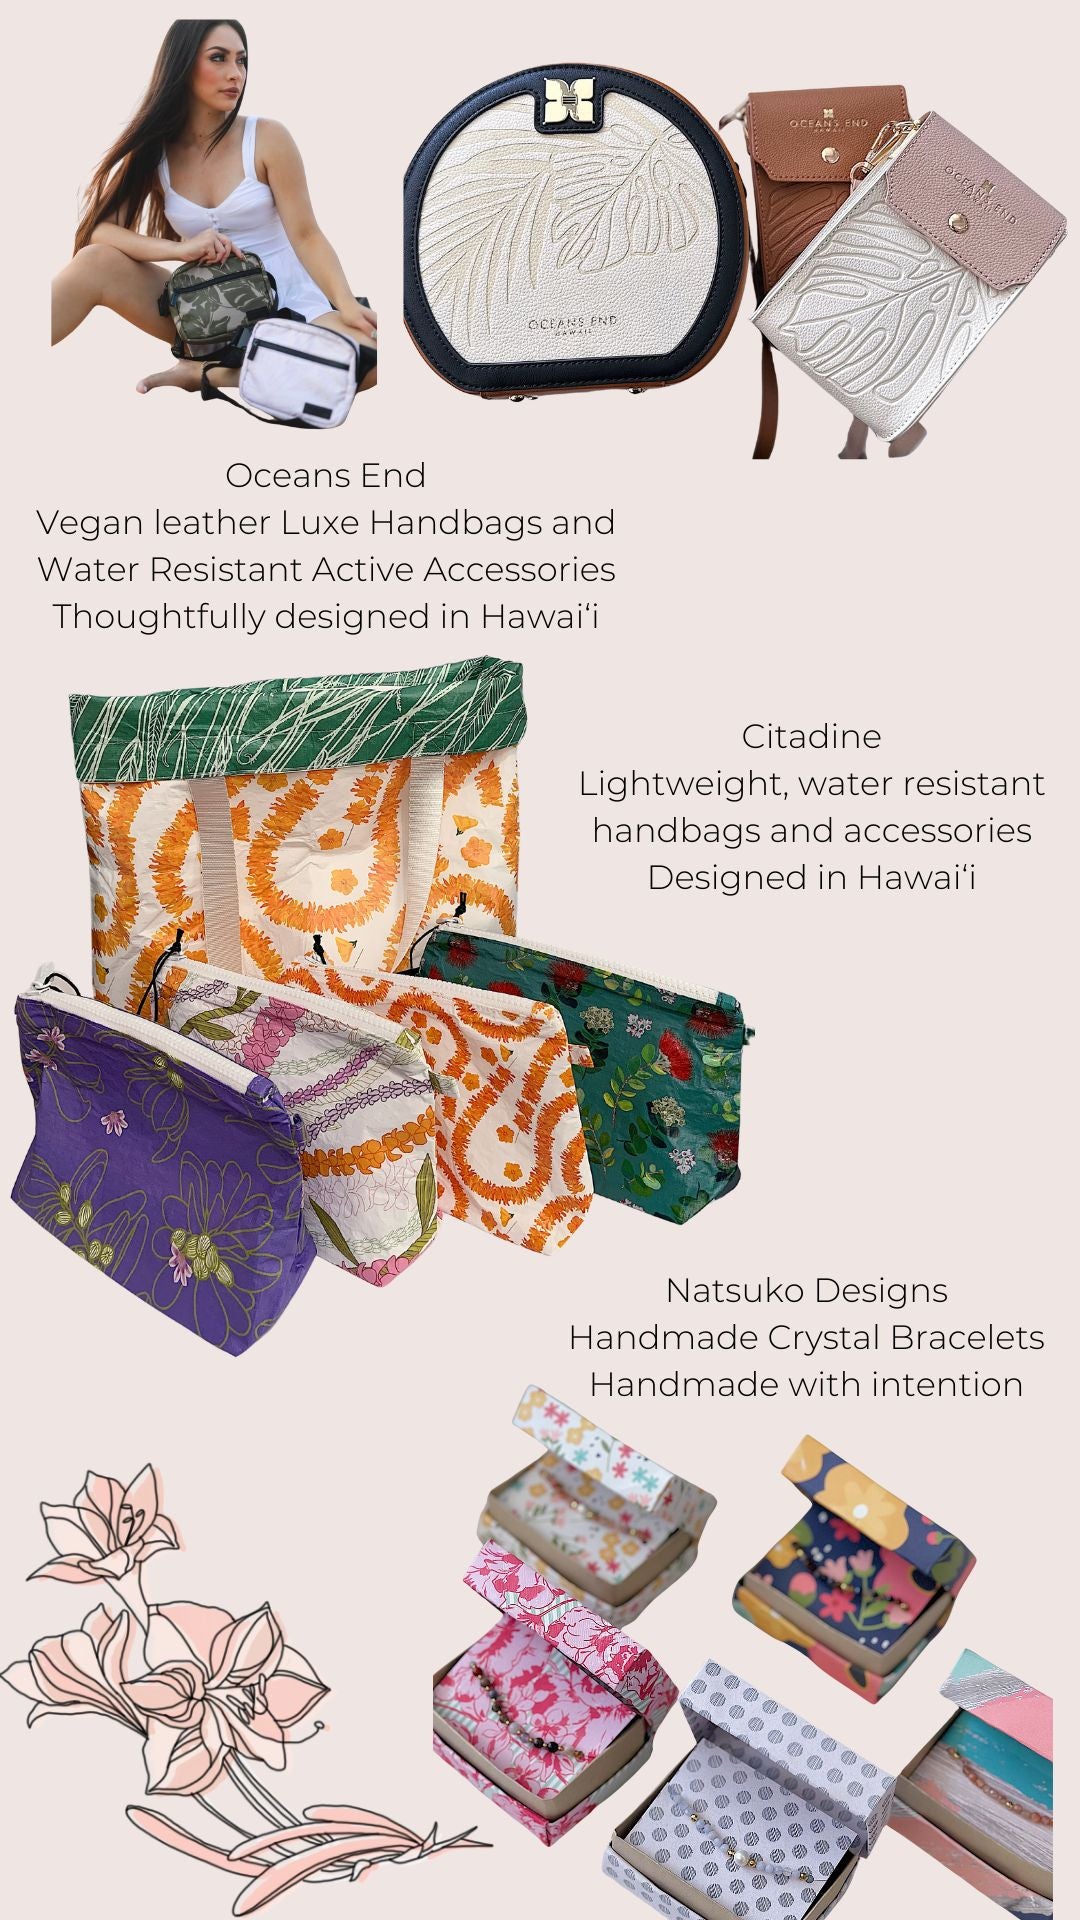 Hawaii accessories brands including Oceans End, Citadine and Natsuko Designs